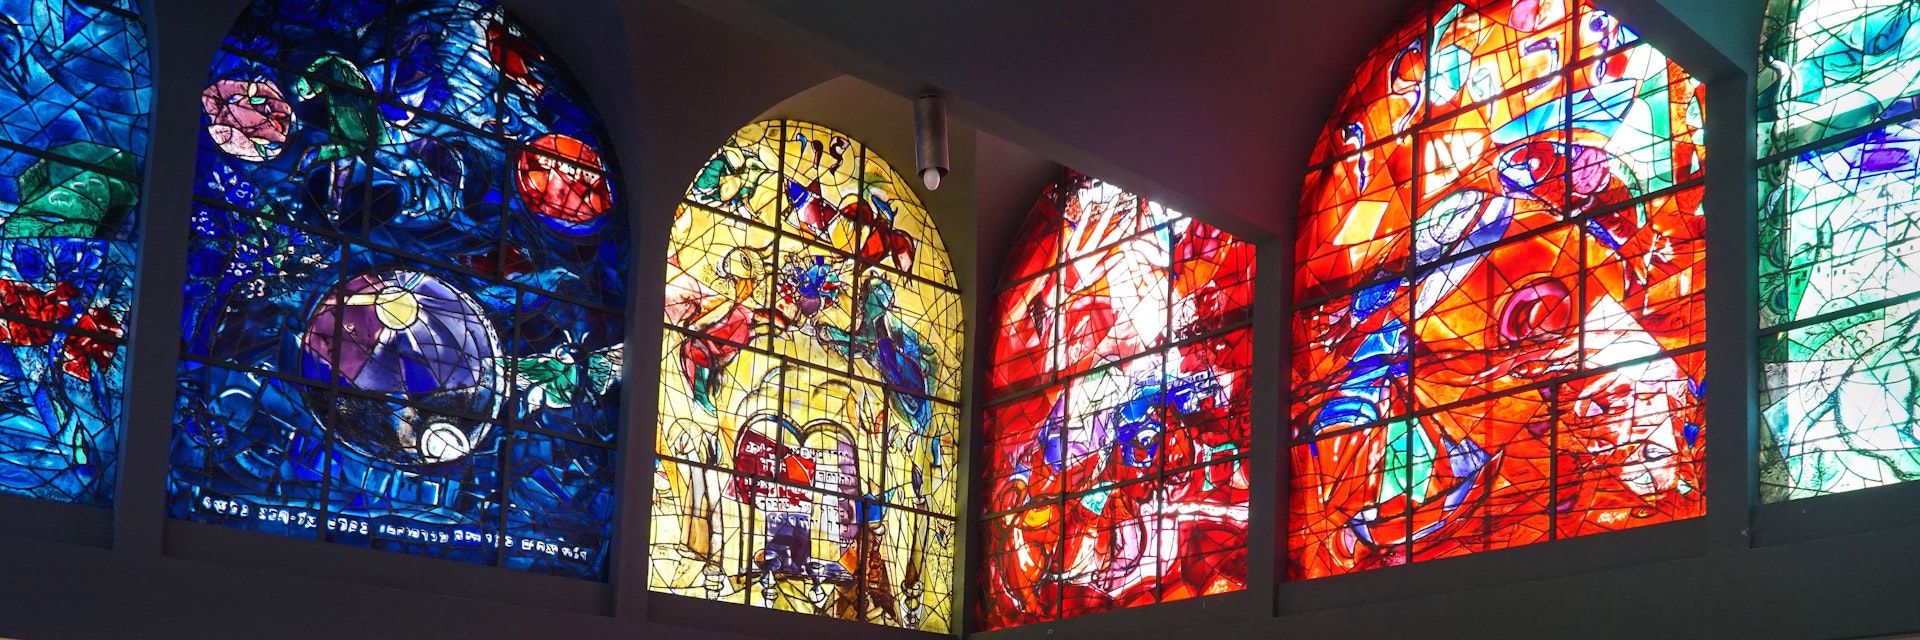 JERUSALEM - JANUARY 2017:  Hadassah Hospital's synagogue is decorated with Chagall's colorful stained glass windows depicting the tribes of Israel, as seen in Jerusalem circa 2017.; Shutterstock ID 569671492; Your name (First / Last): Lauren Keith; GL account no.: 65050; Netsuite department name: Online Editorial; Full Product or Project name including edition: Israel Update 2017